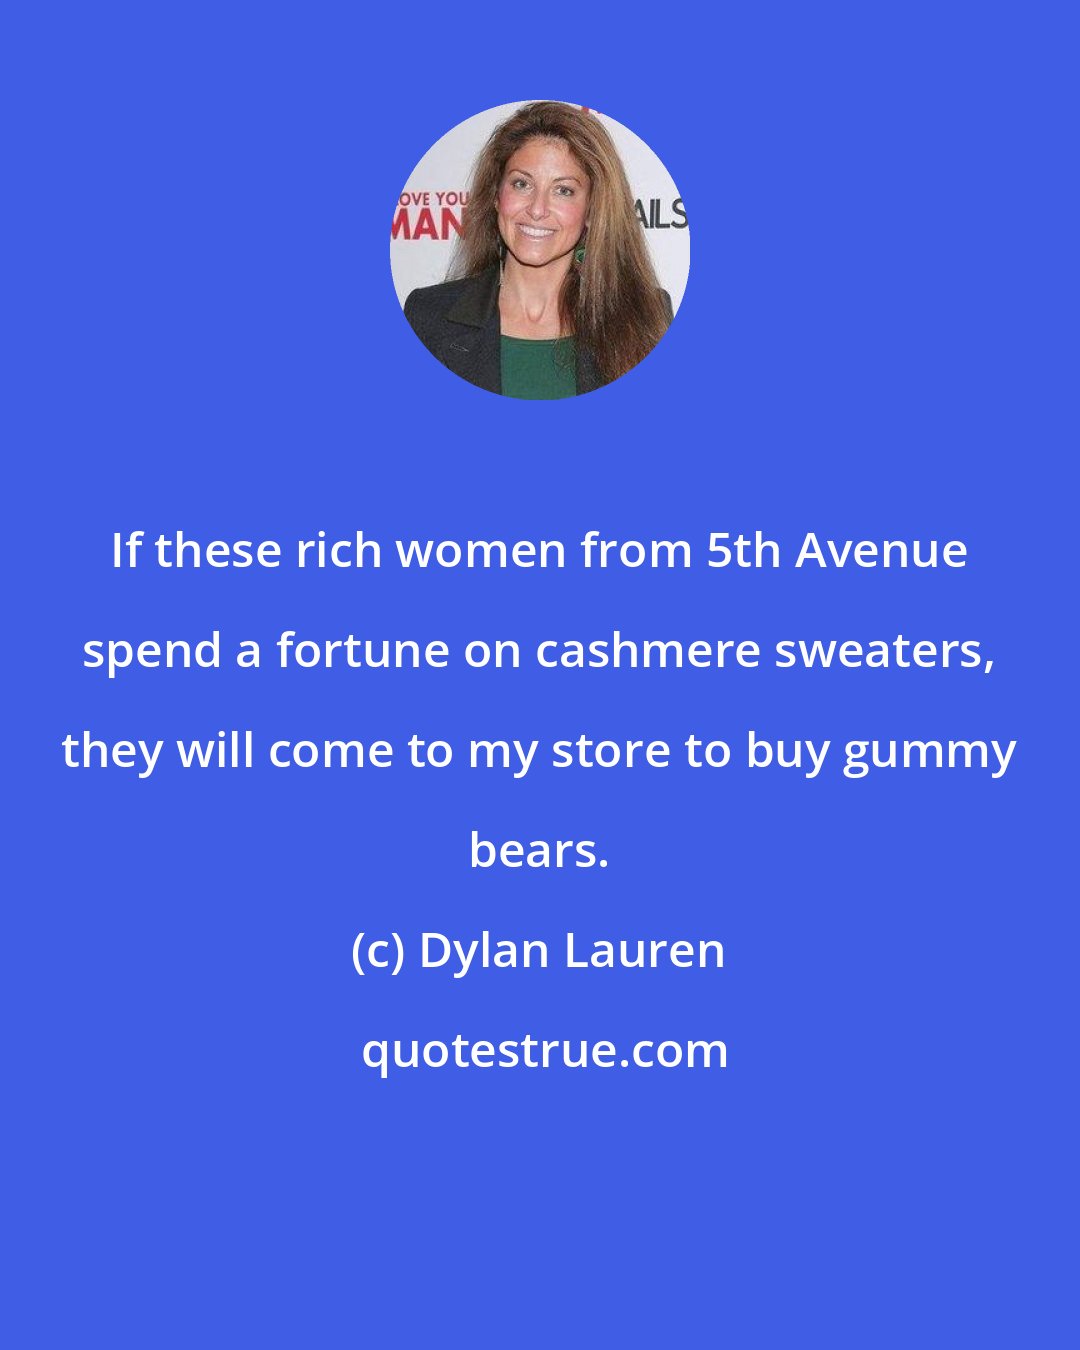 Dylan Lauren: If these rich women from 5th Avenue spend a fortune on cashmere sweaters, they will come to my store to buy gummy bears.